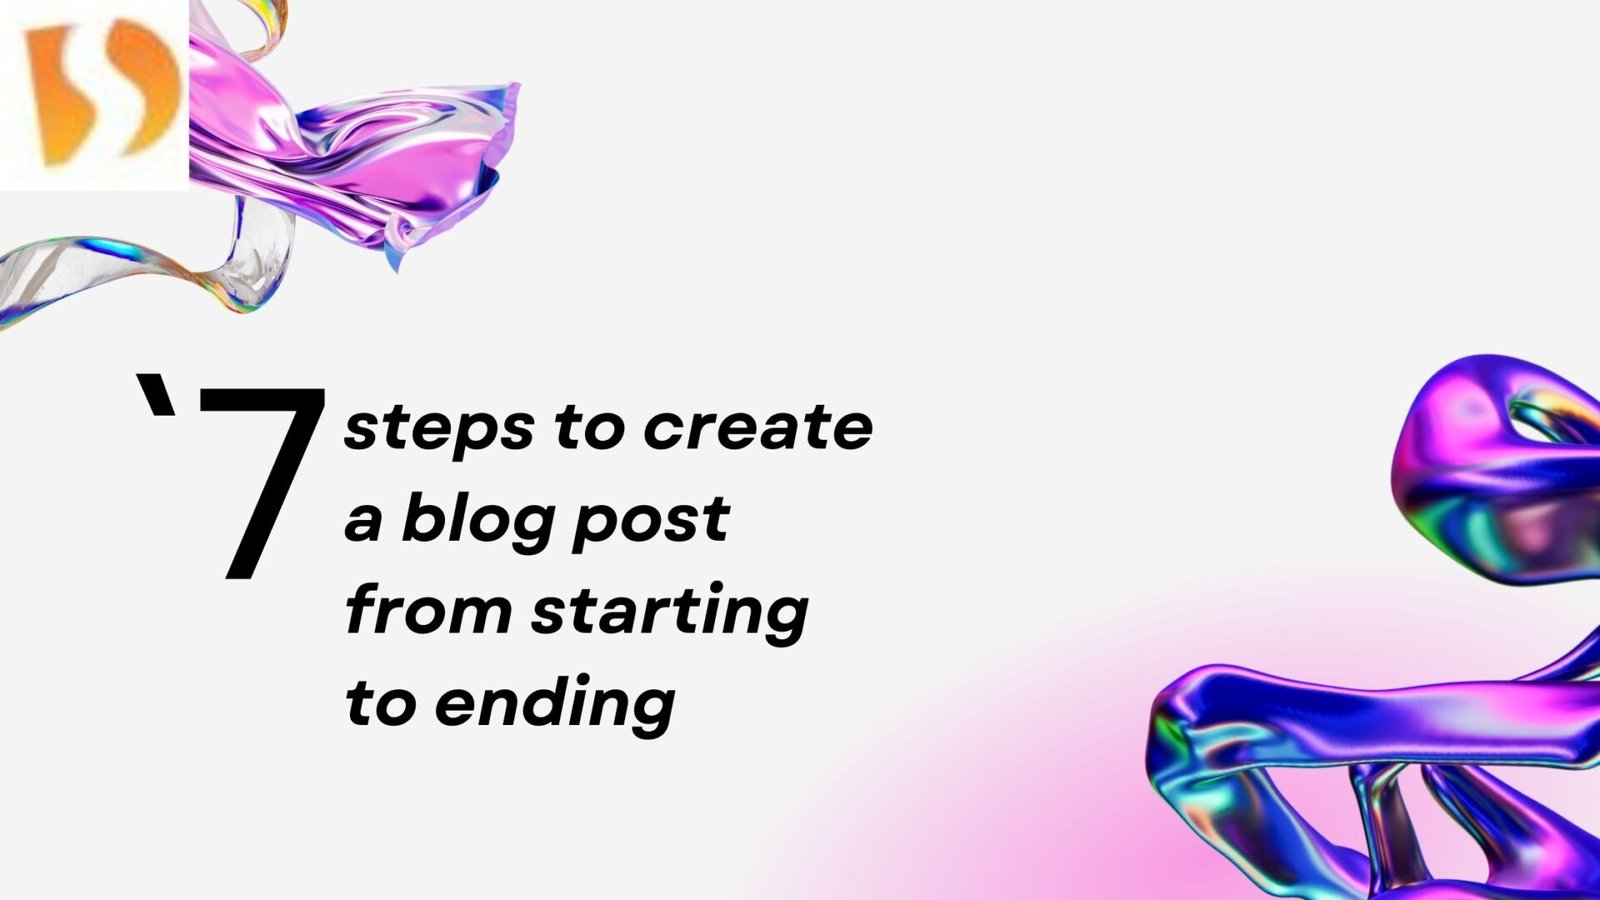 Seven steps to create a blog post from starting to ending